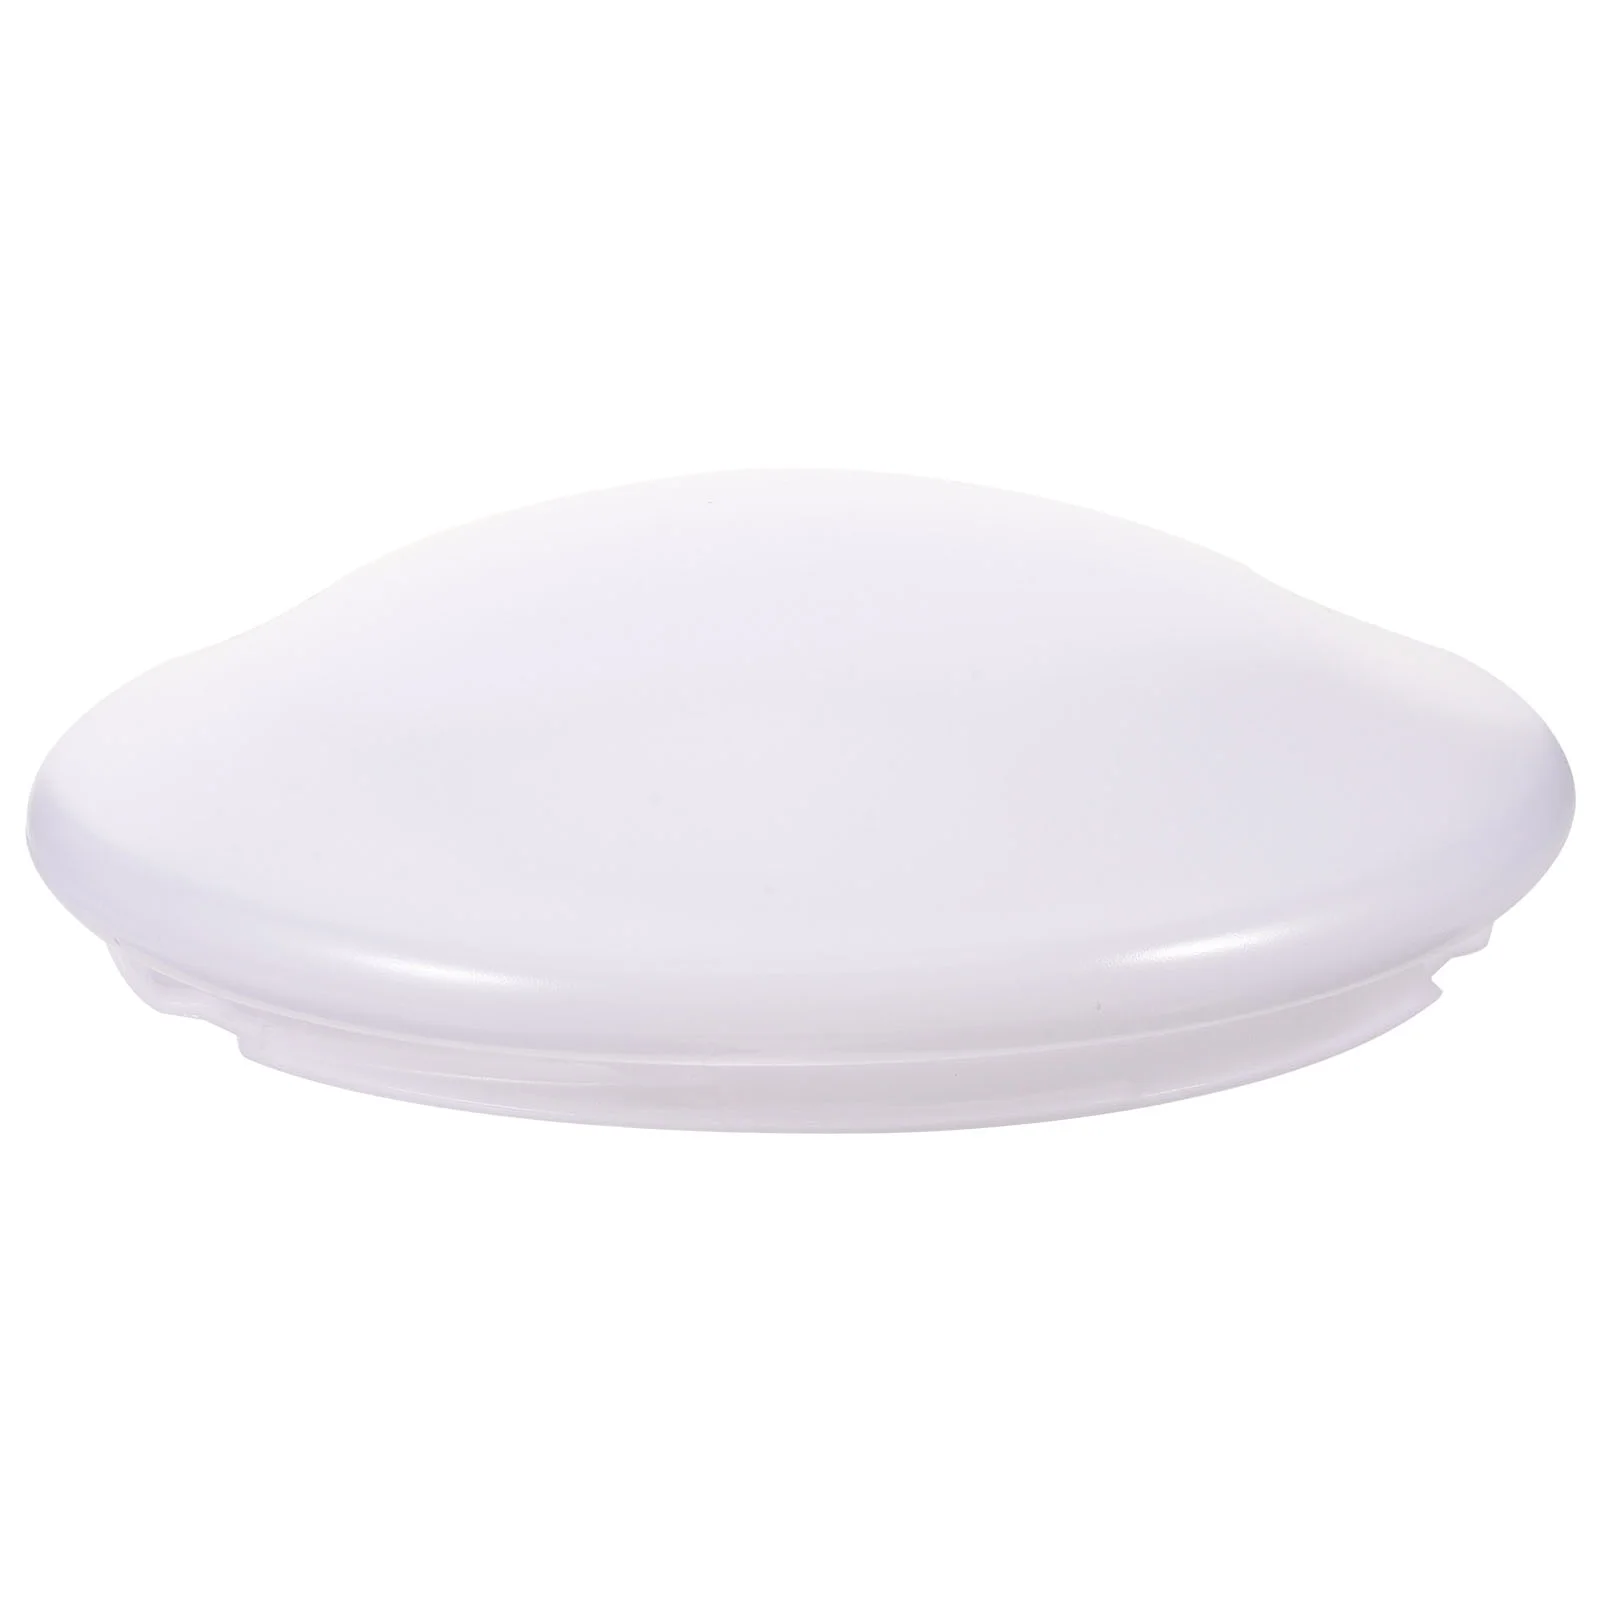 Ceiling Light Shade Plastic Ceiling Plate Cover White Opal Mushroom Glass Shade Ceiling Fixture Hanging Ceiling Lights Shade left right side head lights washer nozzle cover for hyundai 20112012 2013 2014 azera grandeur hg 986803v000 986903v000